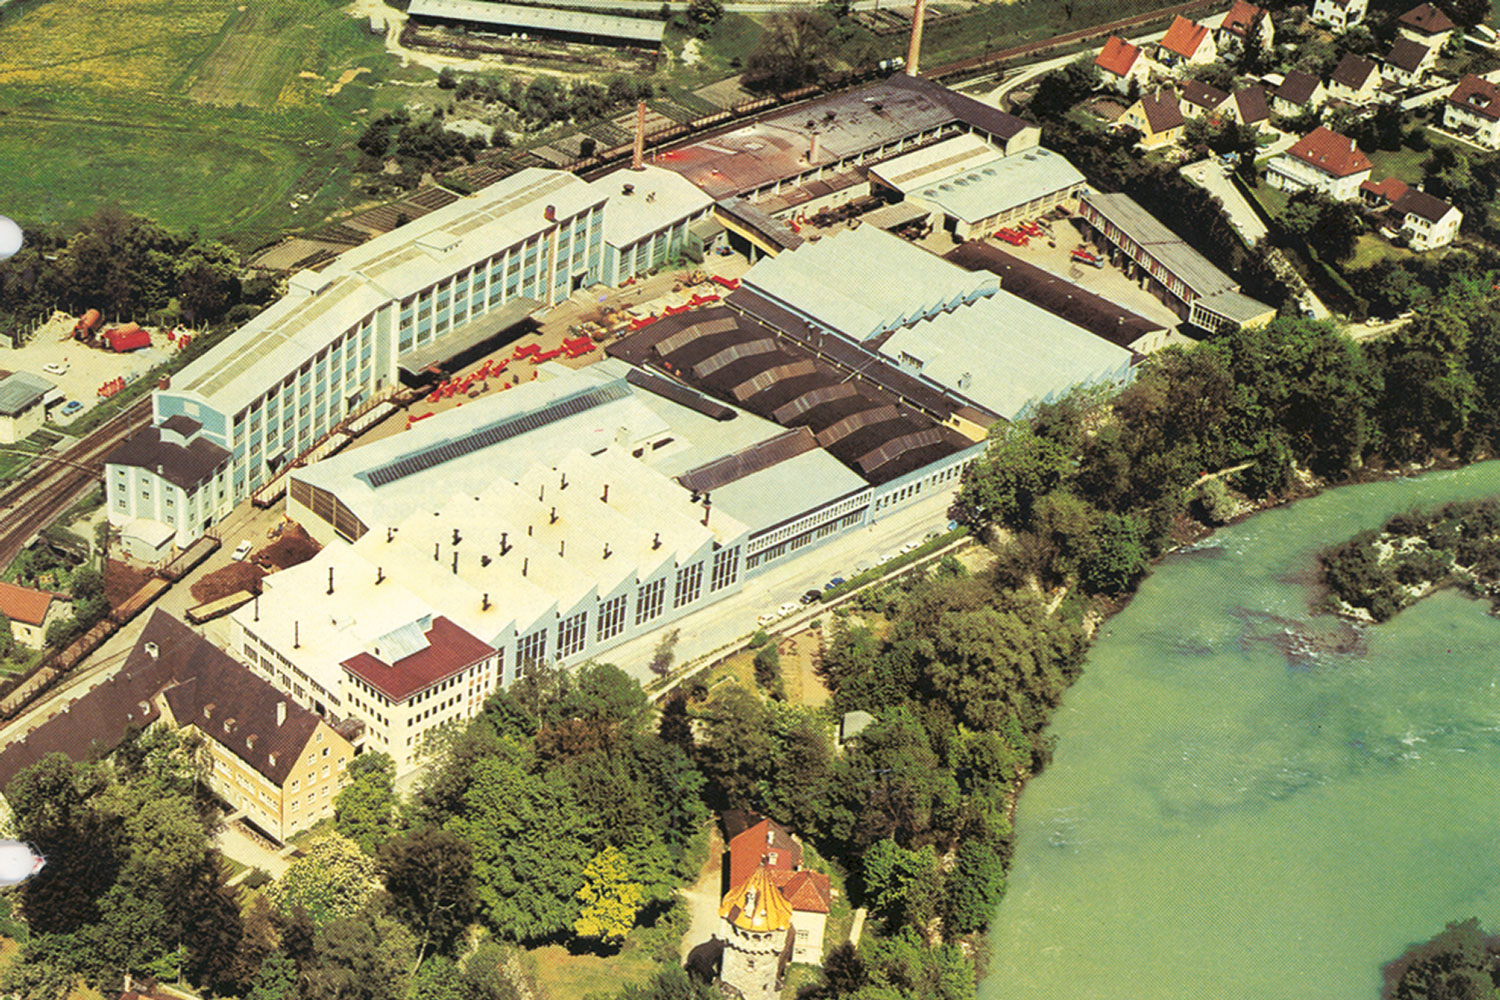 The Bavarian plough factory at Landsberg between the railway tracks and the Lech river.